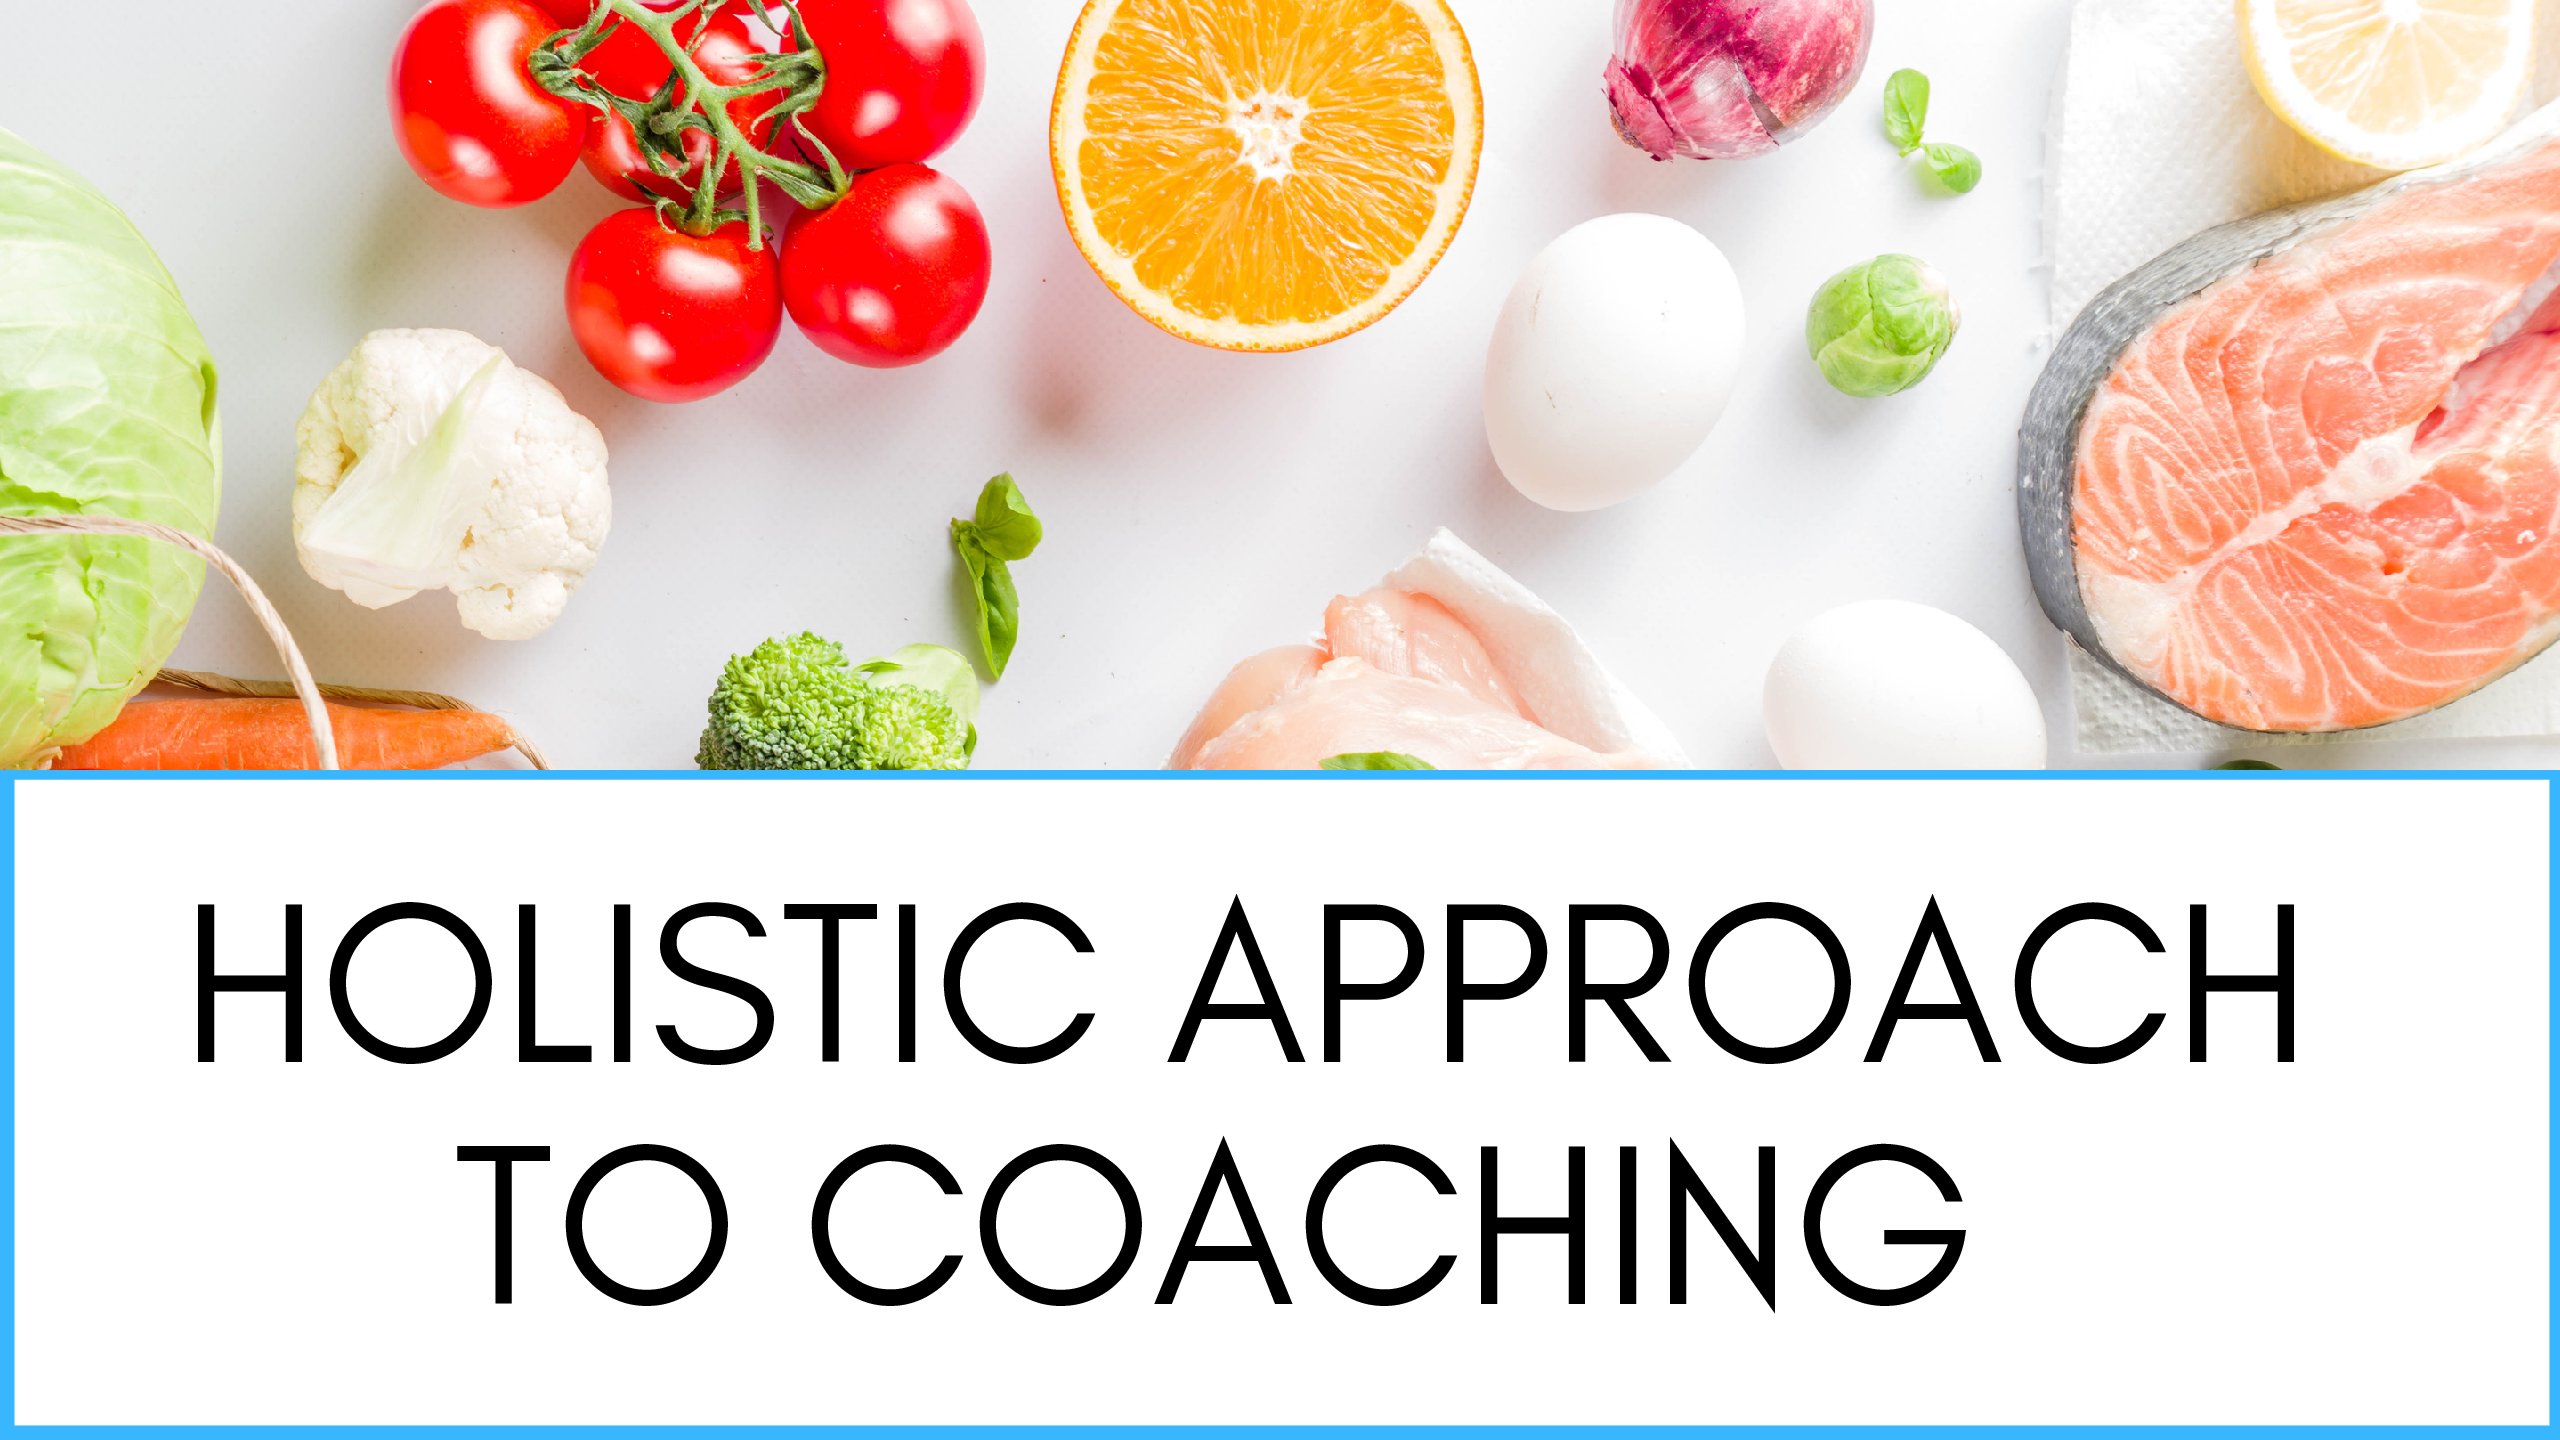 Holistic Approach To Coaching